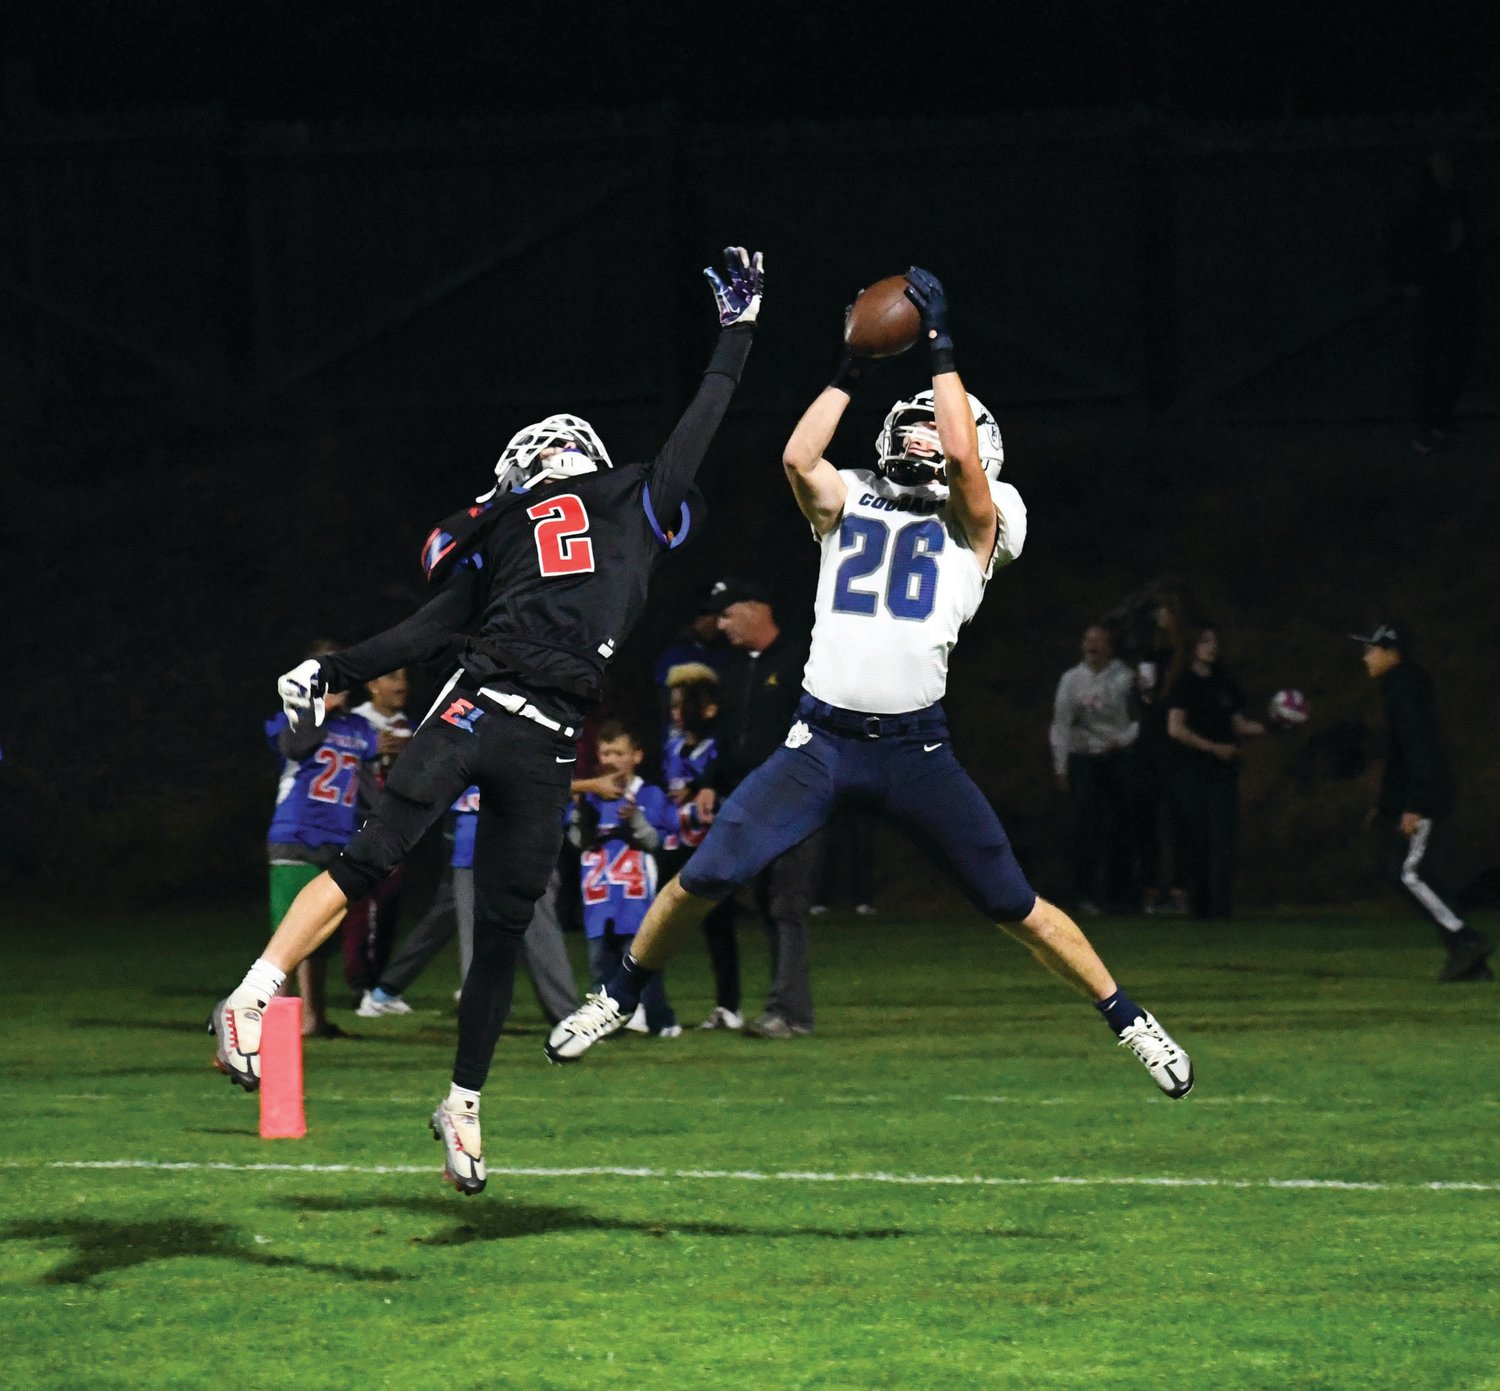 East Jefferson's Brody Moore tries to break up a pass play during the Rivals matchup against Cascade Christian.